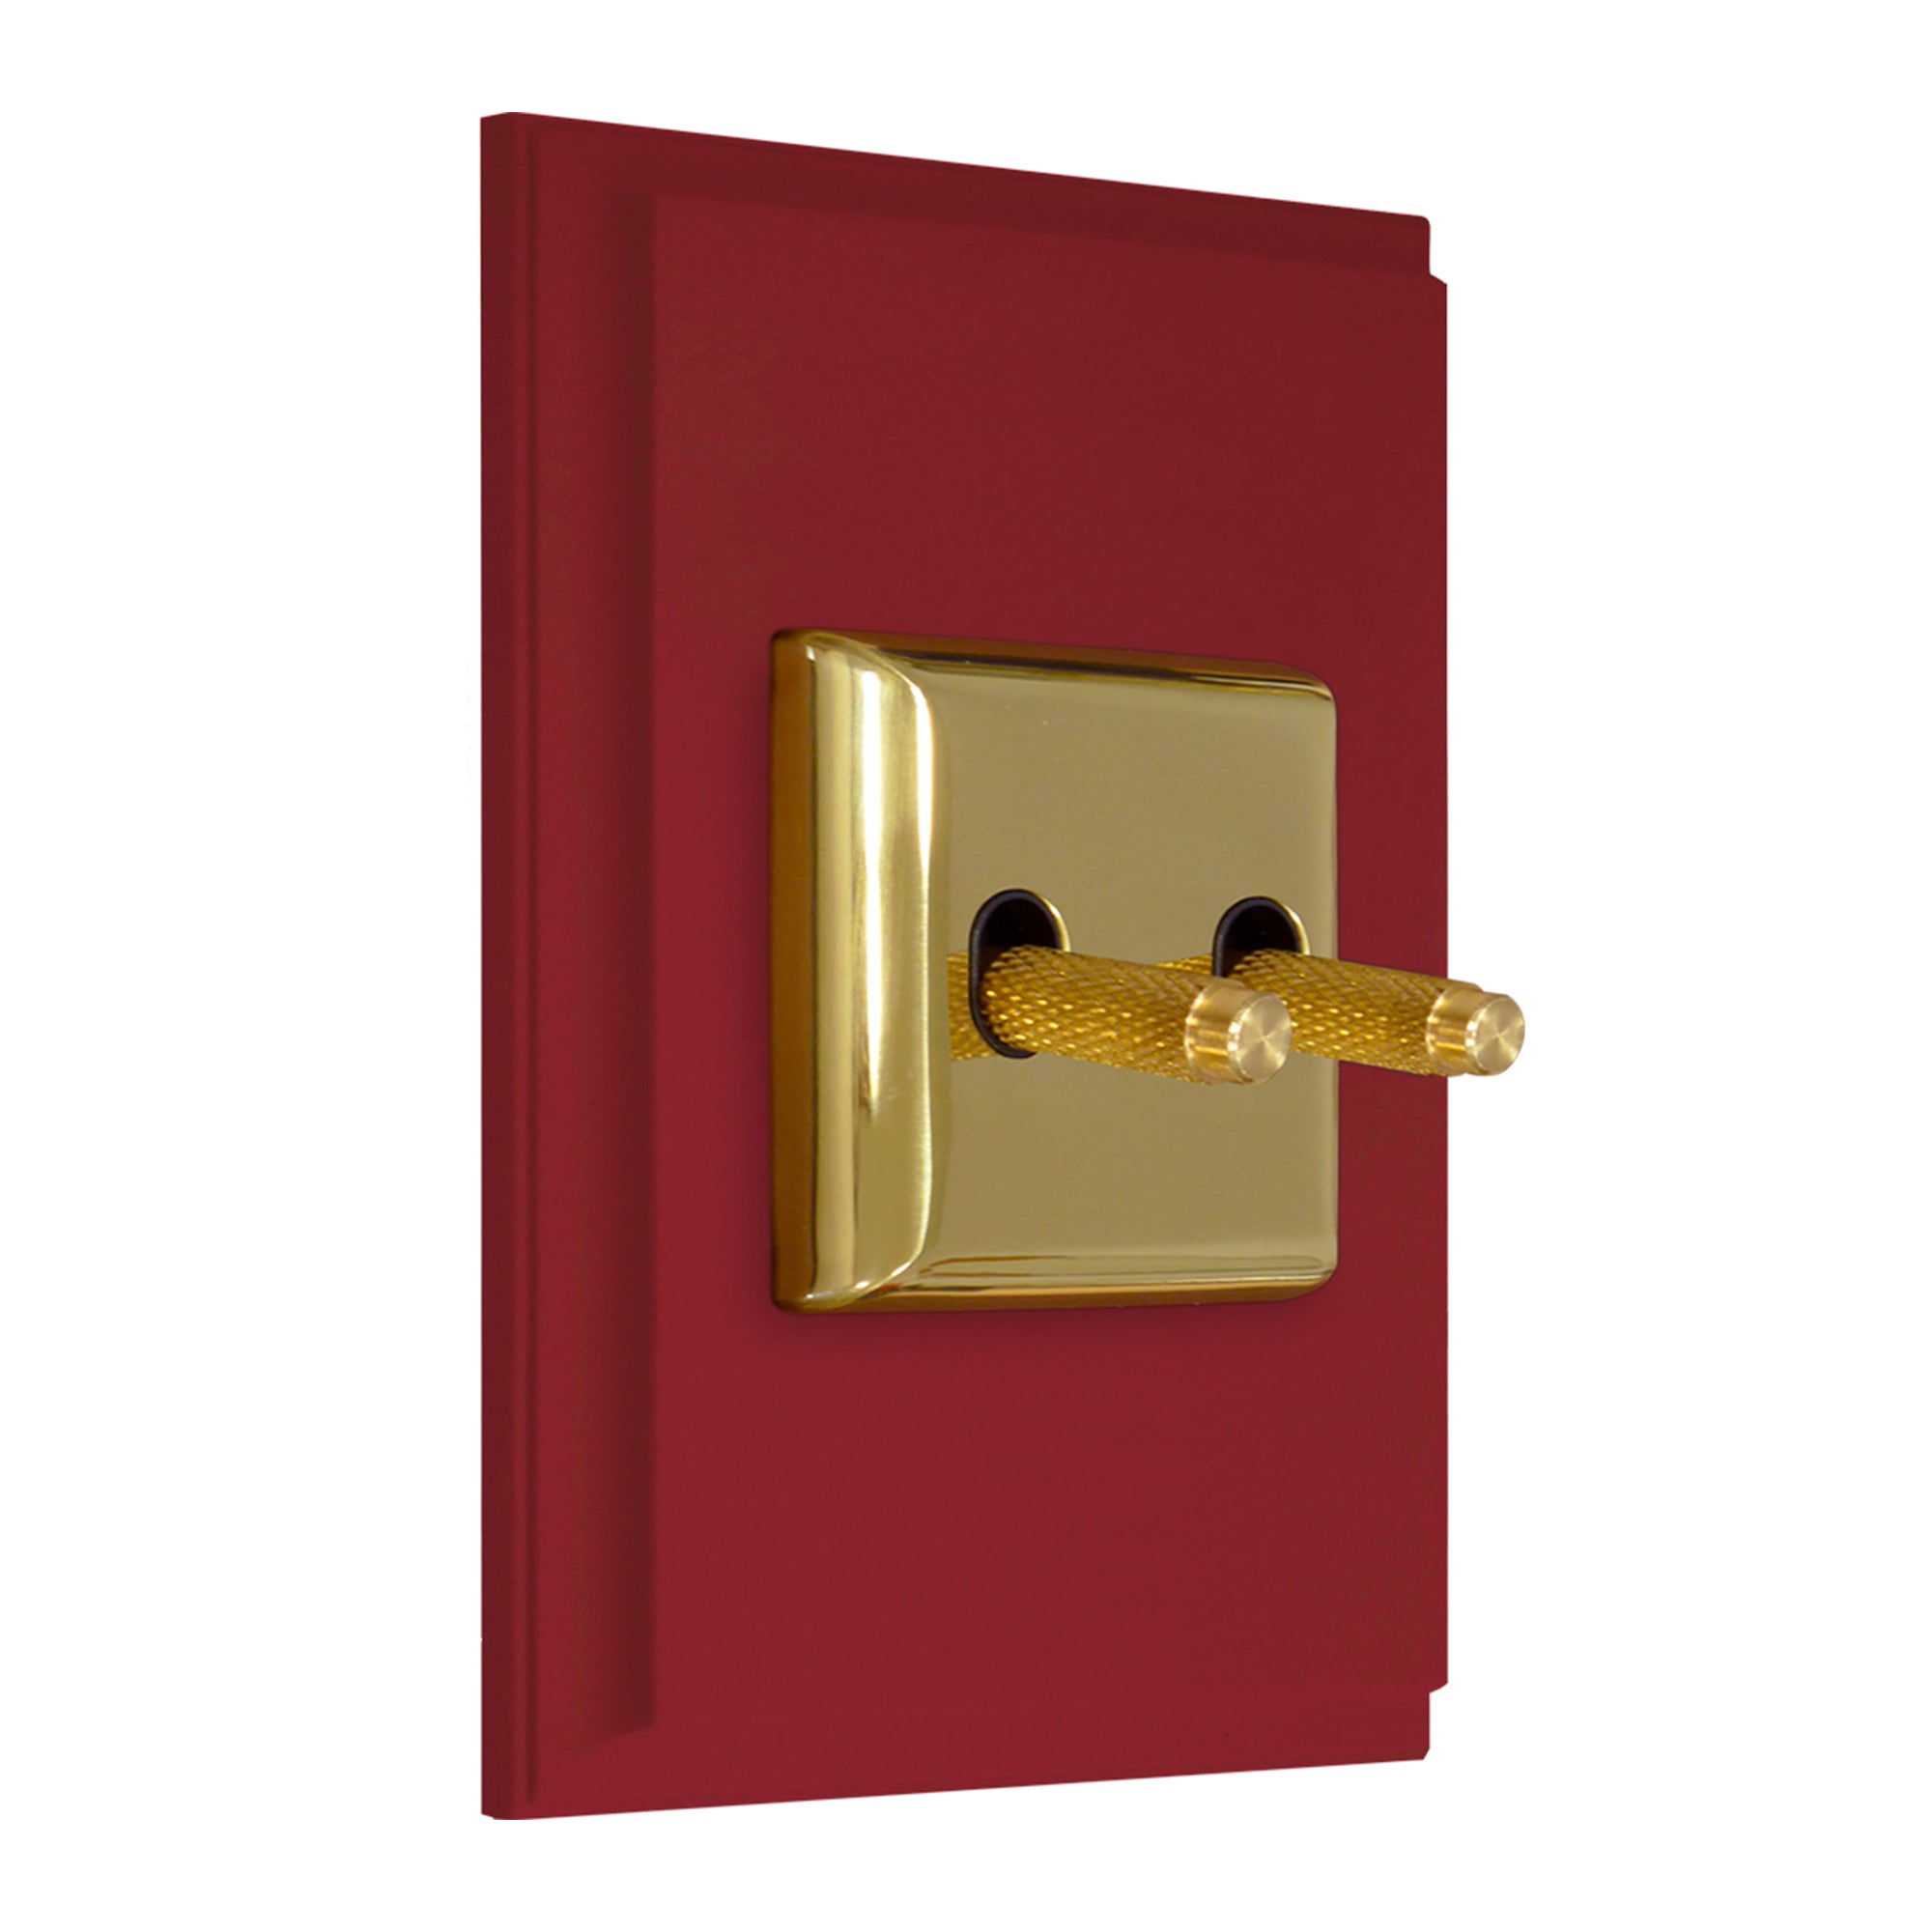 Marco double toggle light switch